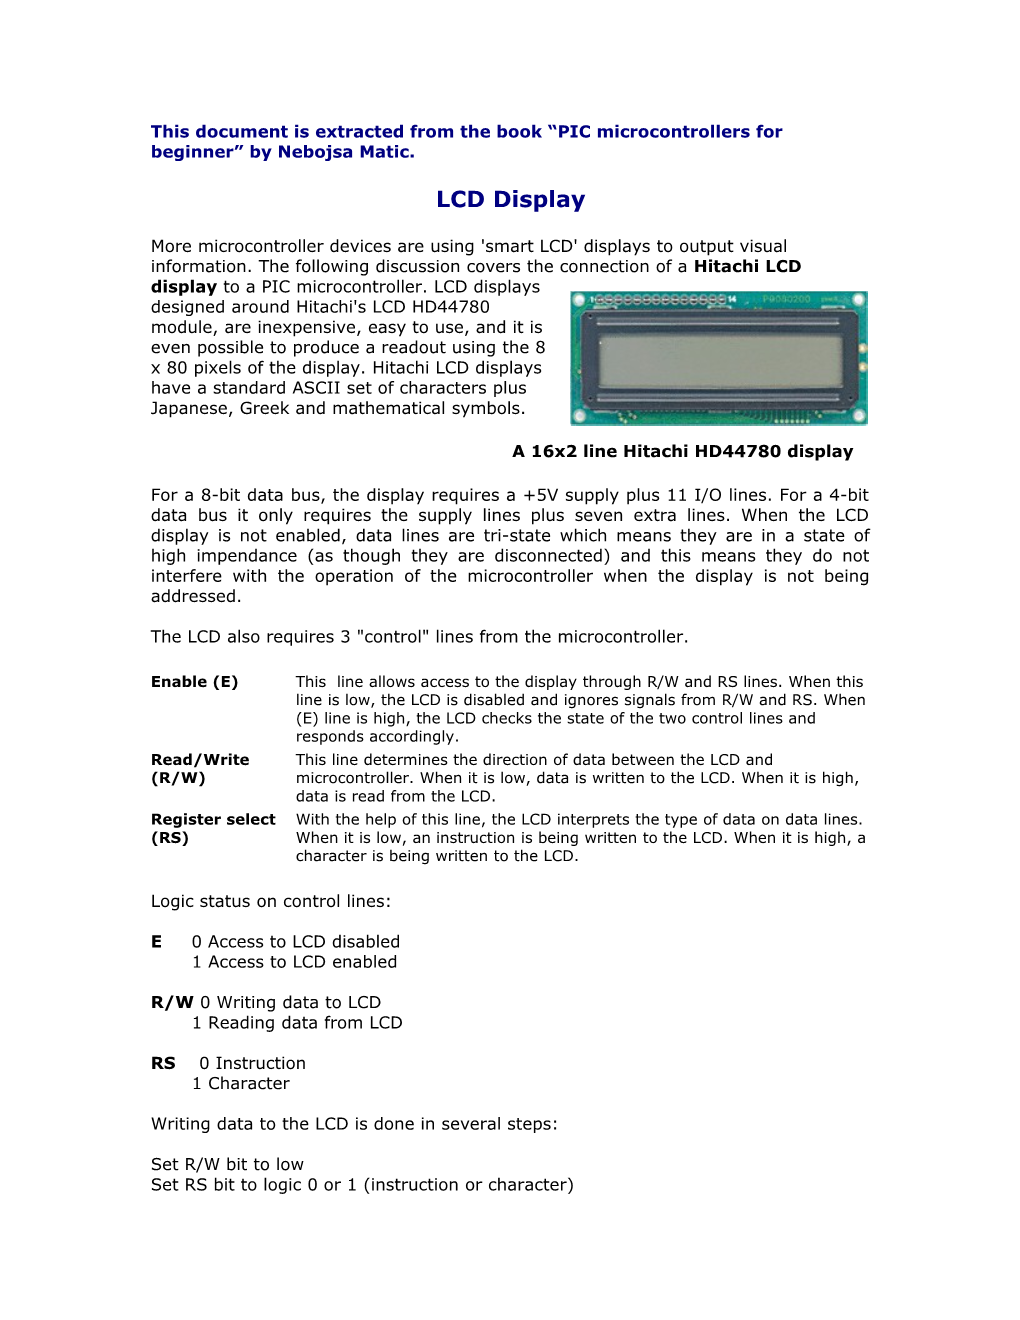 This Document Is Extracted from the Book PIC Microcontrollers for Beginner by Nebojsa Matic